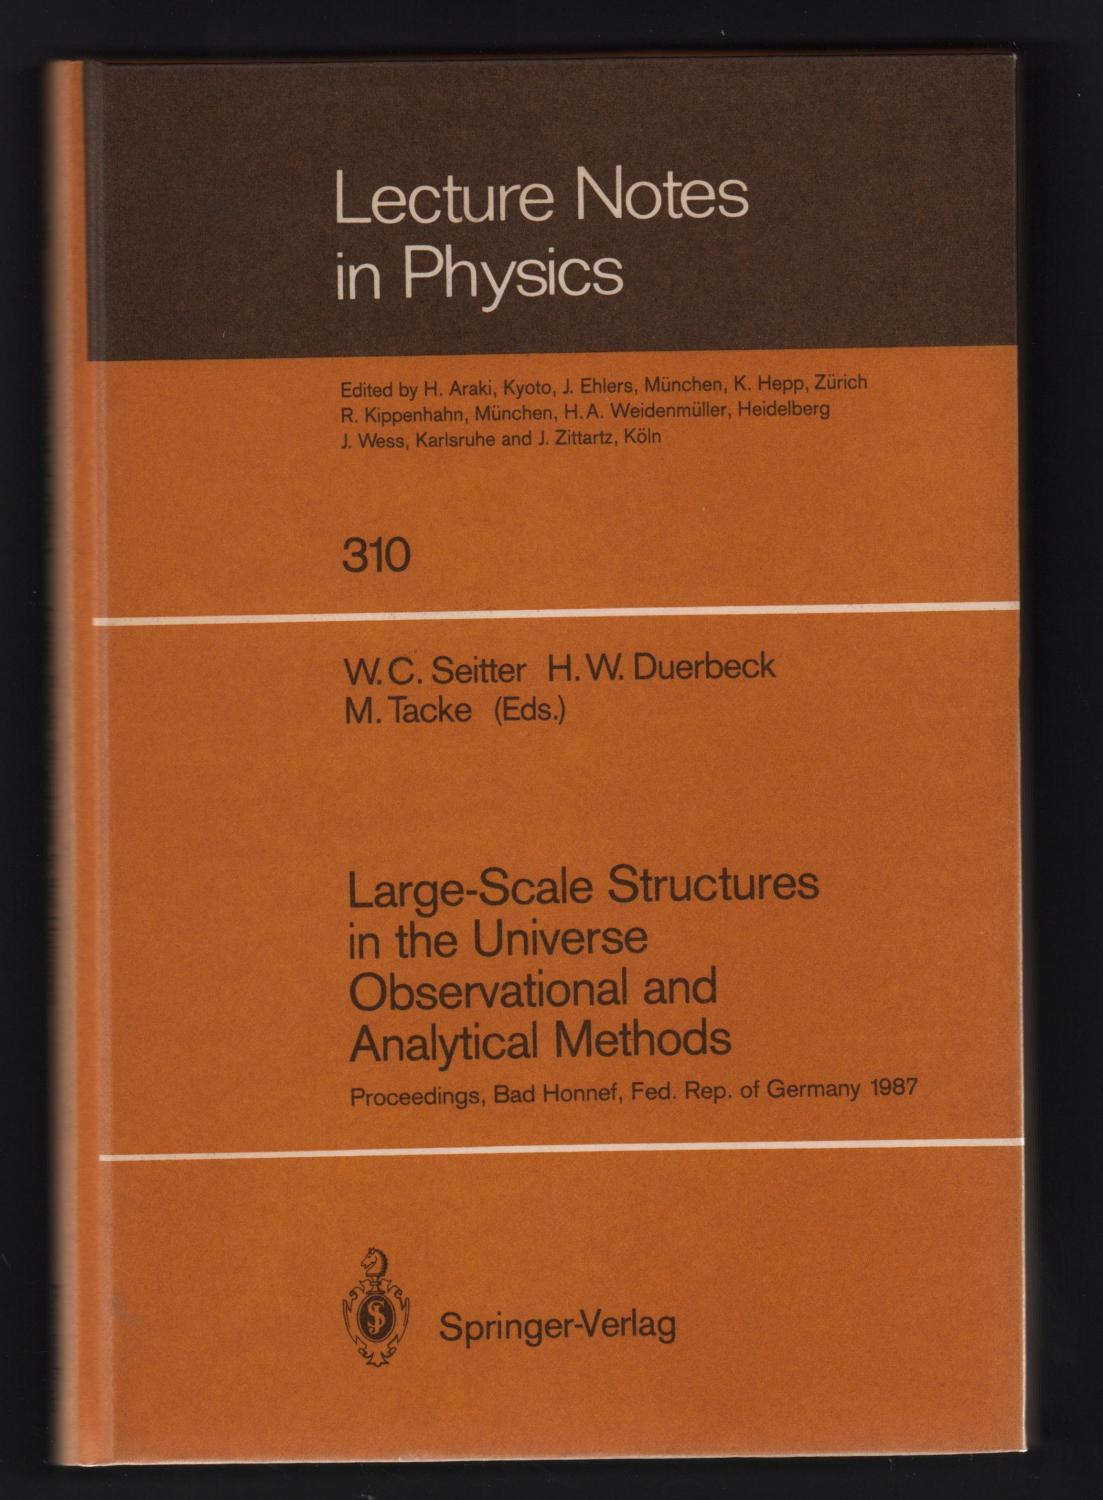 Large-Scale Structures in the Universe Observational and Analytical Methods: Proceedings of a Workshop, Held at the Physikzentrum Bad Honnef, Fed. Rep. of Germany, December 9–12, 1987 [Lecture Notes in Physics 310] - W. C. Seitter, H. W. Duerbeck & M. Tacke, ed.